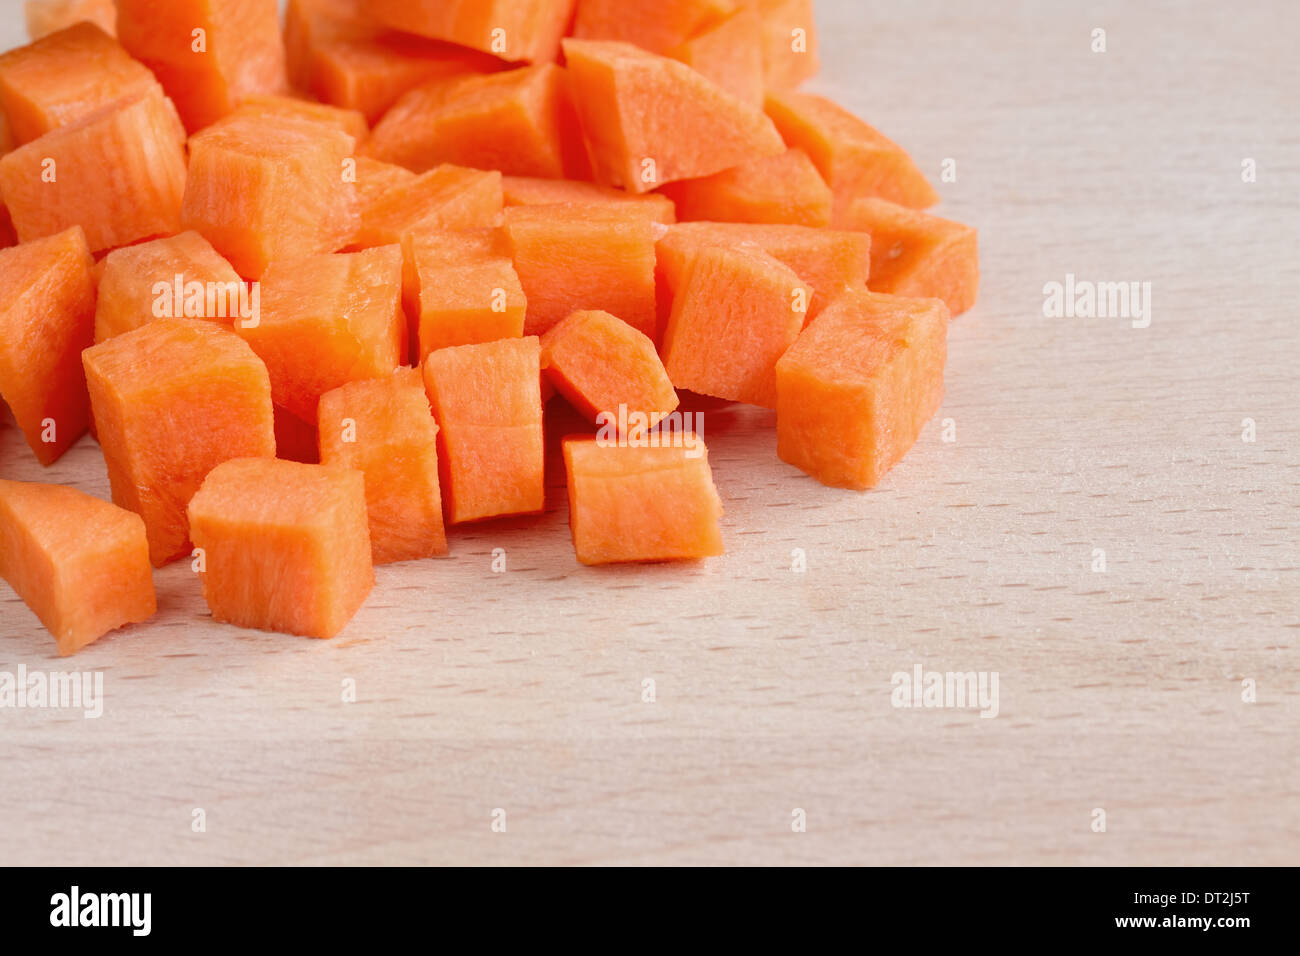 Diced raw carrots on a chopping board Stock Photo